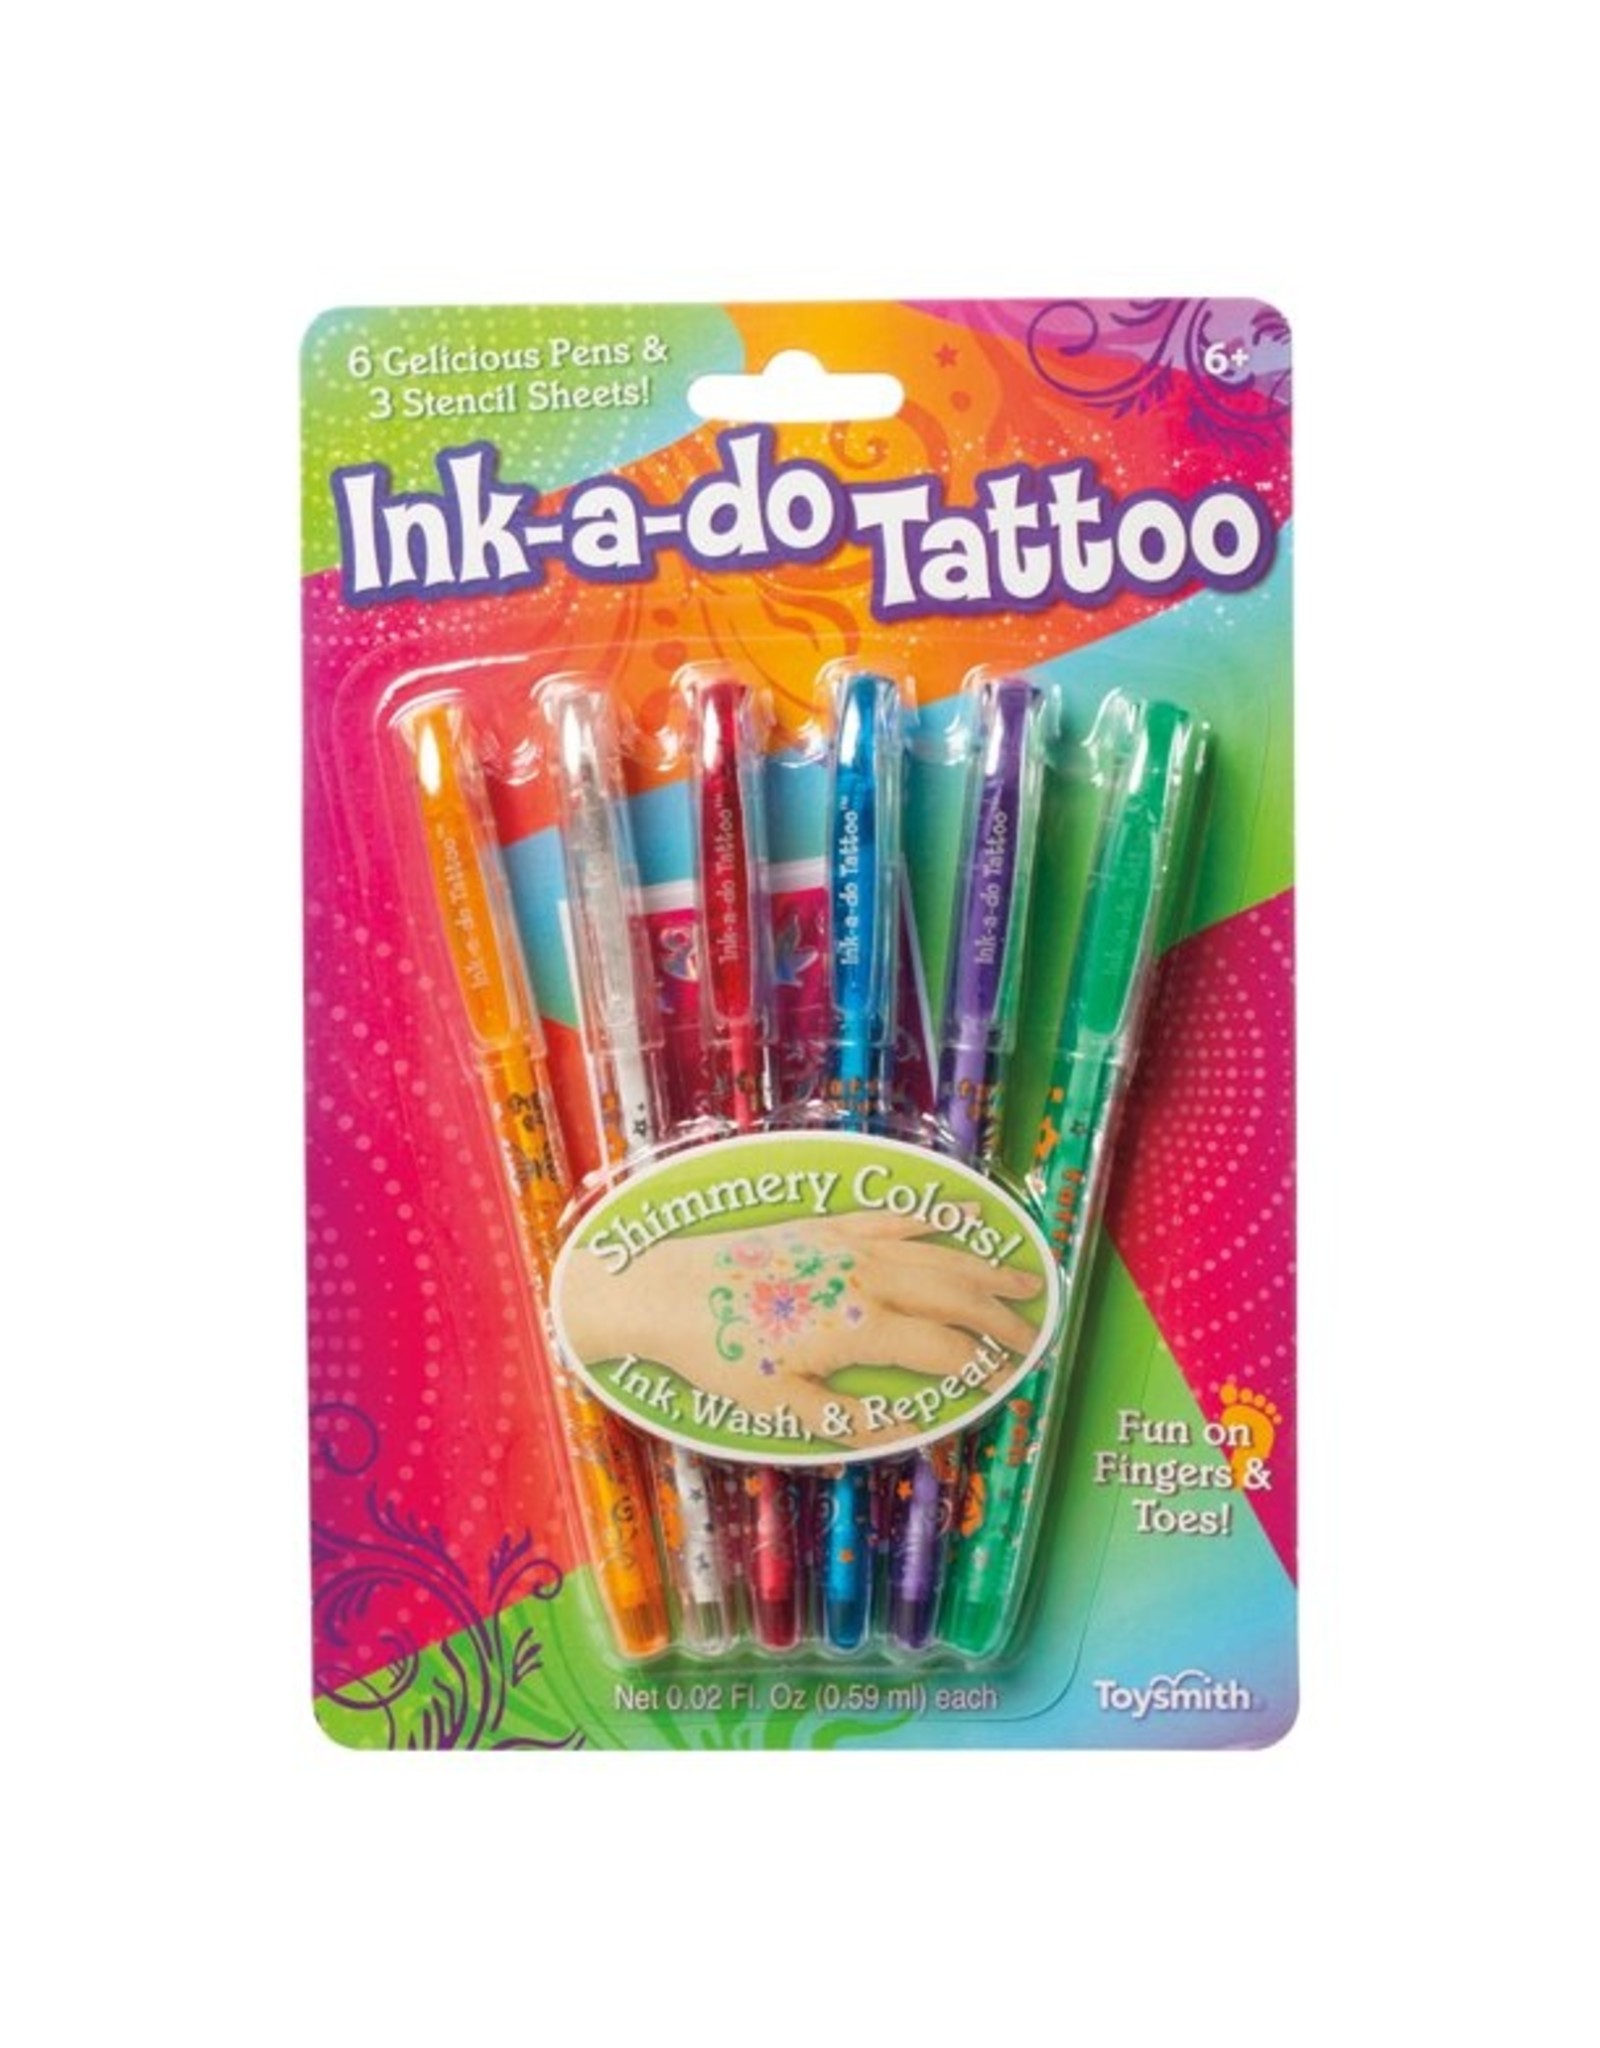 FMGT Ink Brow Tattoo Pen 18g Best Price and Fast Shipping from Beauty Box  Korea